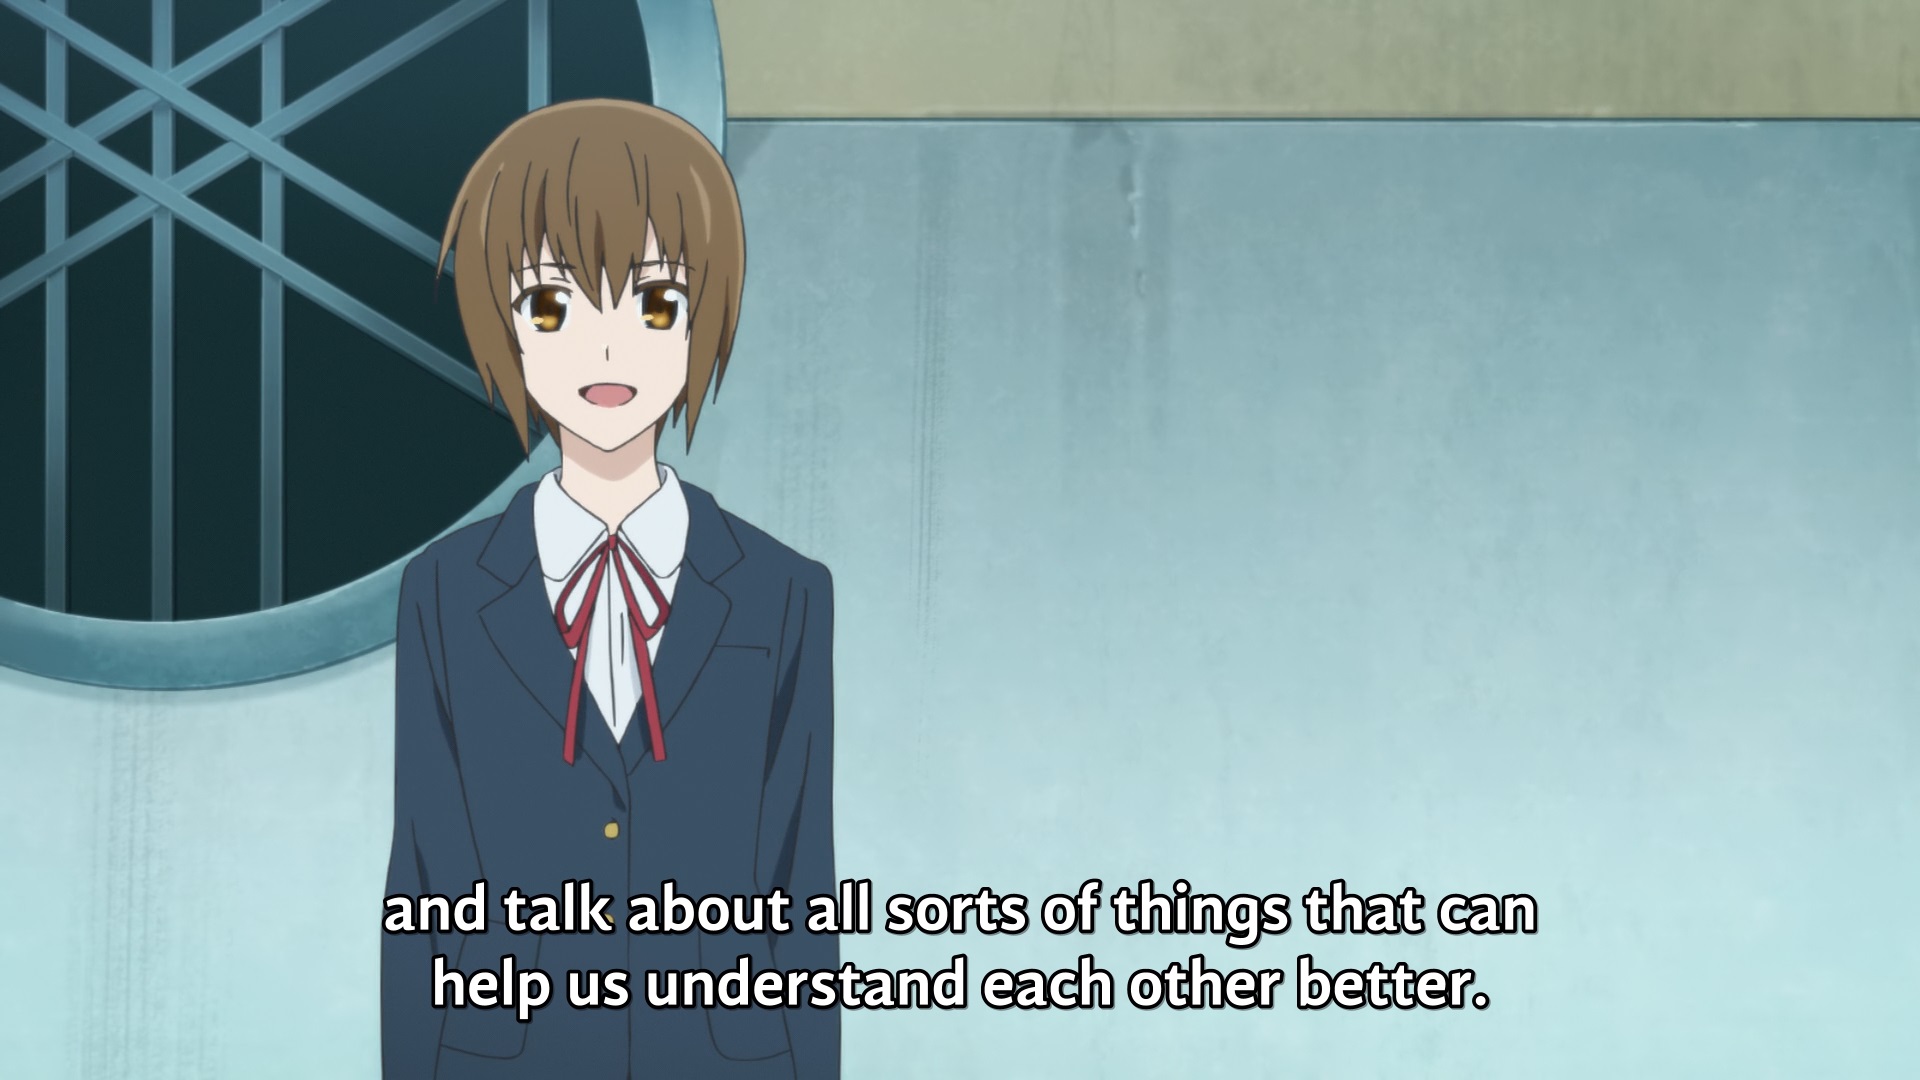 "and talk about all sorts of things that can help us understand each other better."